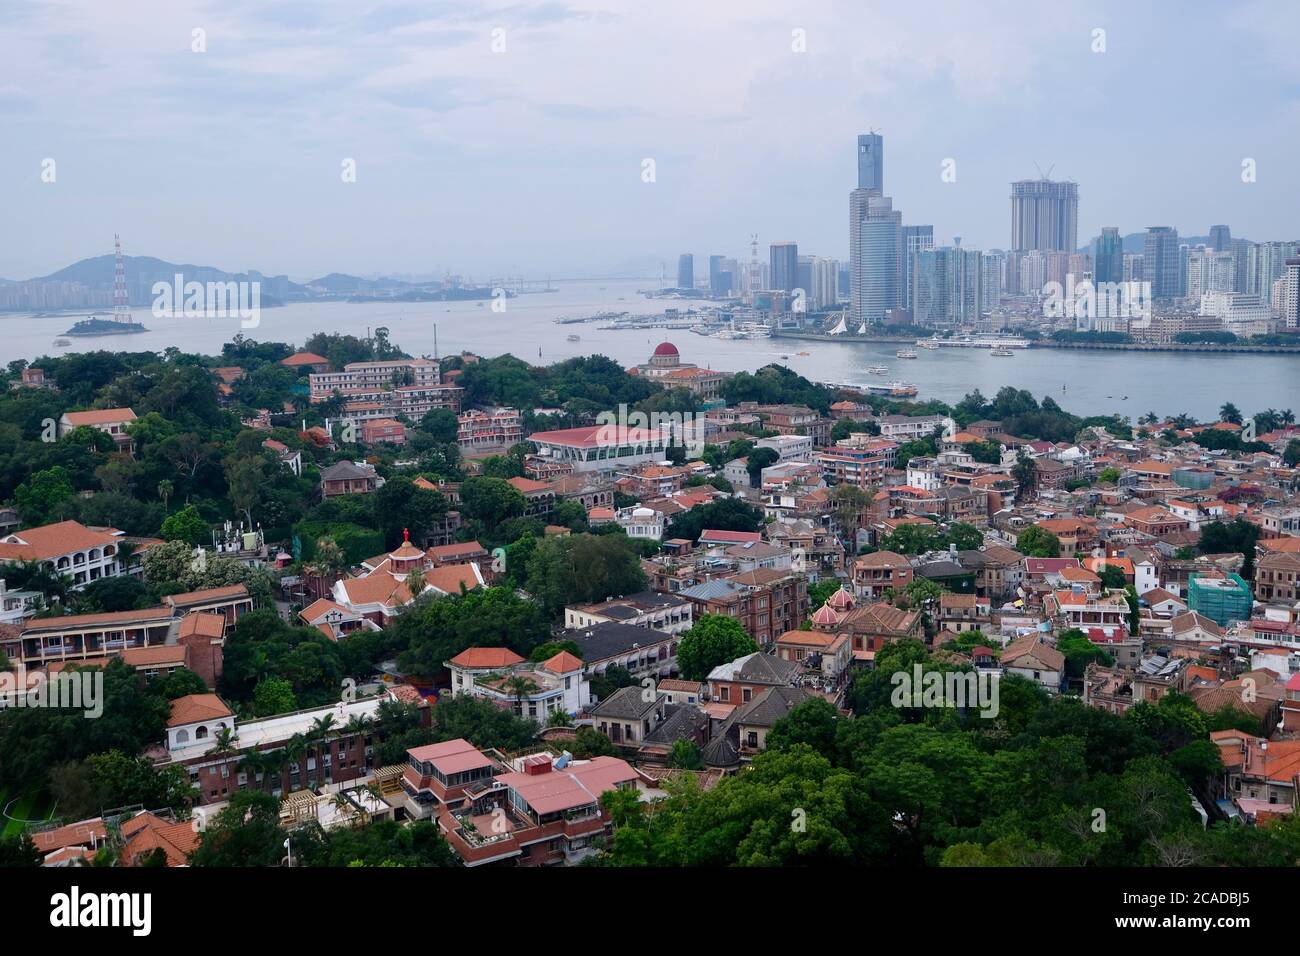 aerial view of Gulangyu(Kulangsu) Island in Xiamen,Fujian,China. Houses and trees. Modern skyscrapers on the other side of the river. Stock Photo